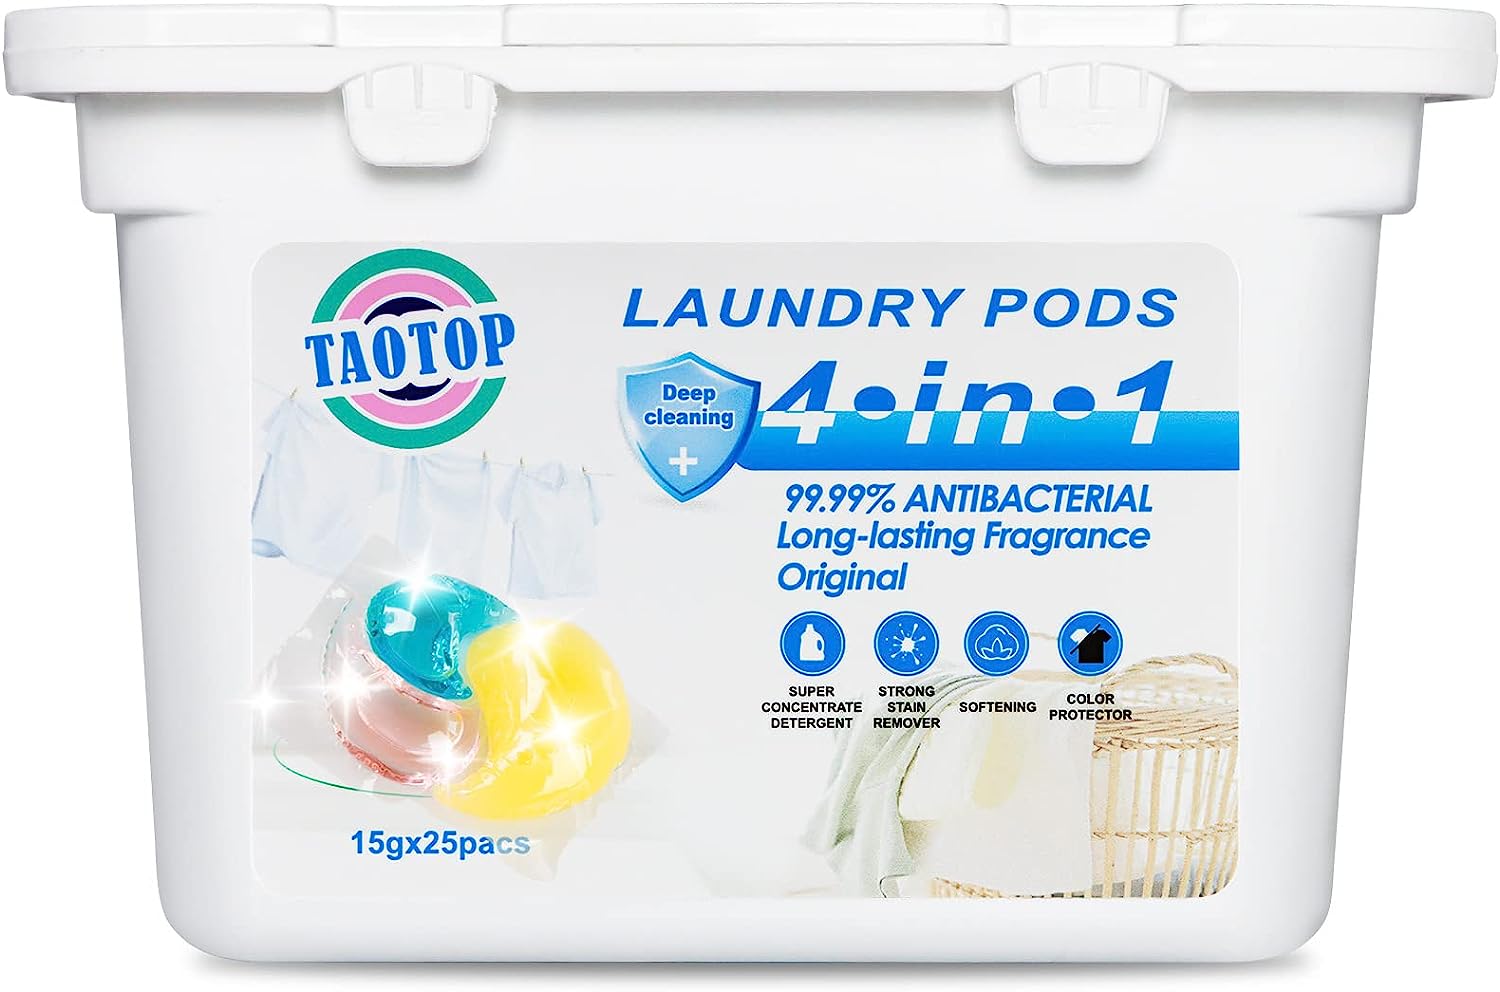 https://images.ctfassets.net/cnu0m8re1exe/5HHtztIhGEzPP2oS9TAPg0/cc5a7bd45a5c1ea8de0749f85b15dbe7/TAOTOP_3-in-1_Laundry_Pods_with_Softener.jpg